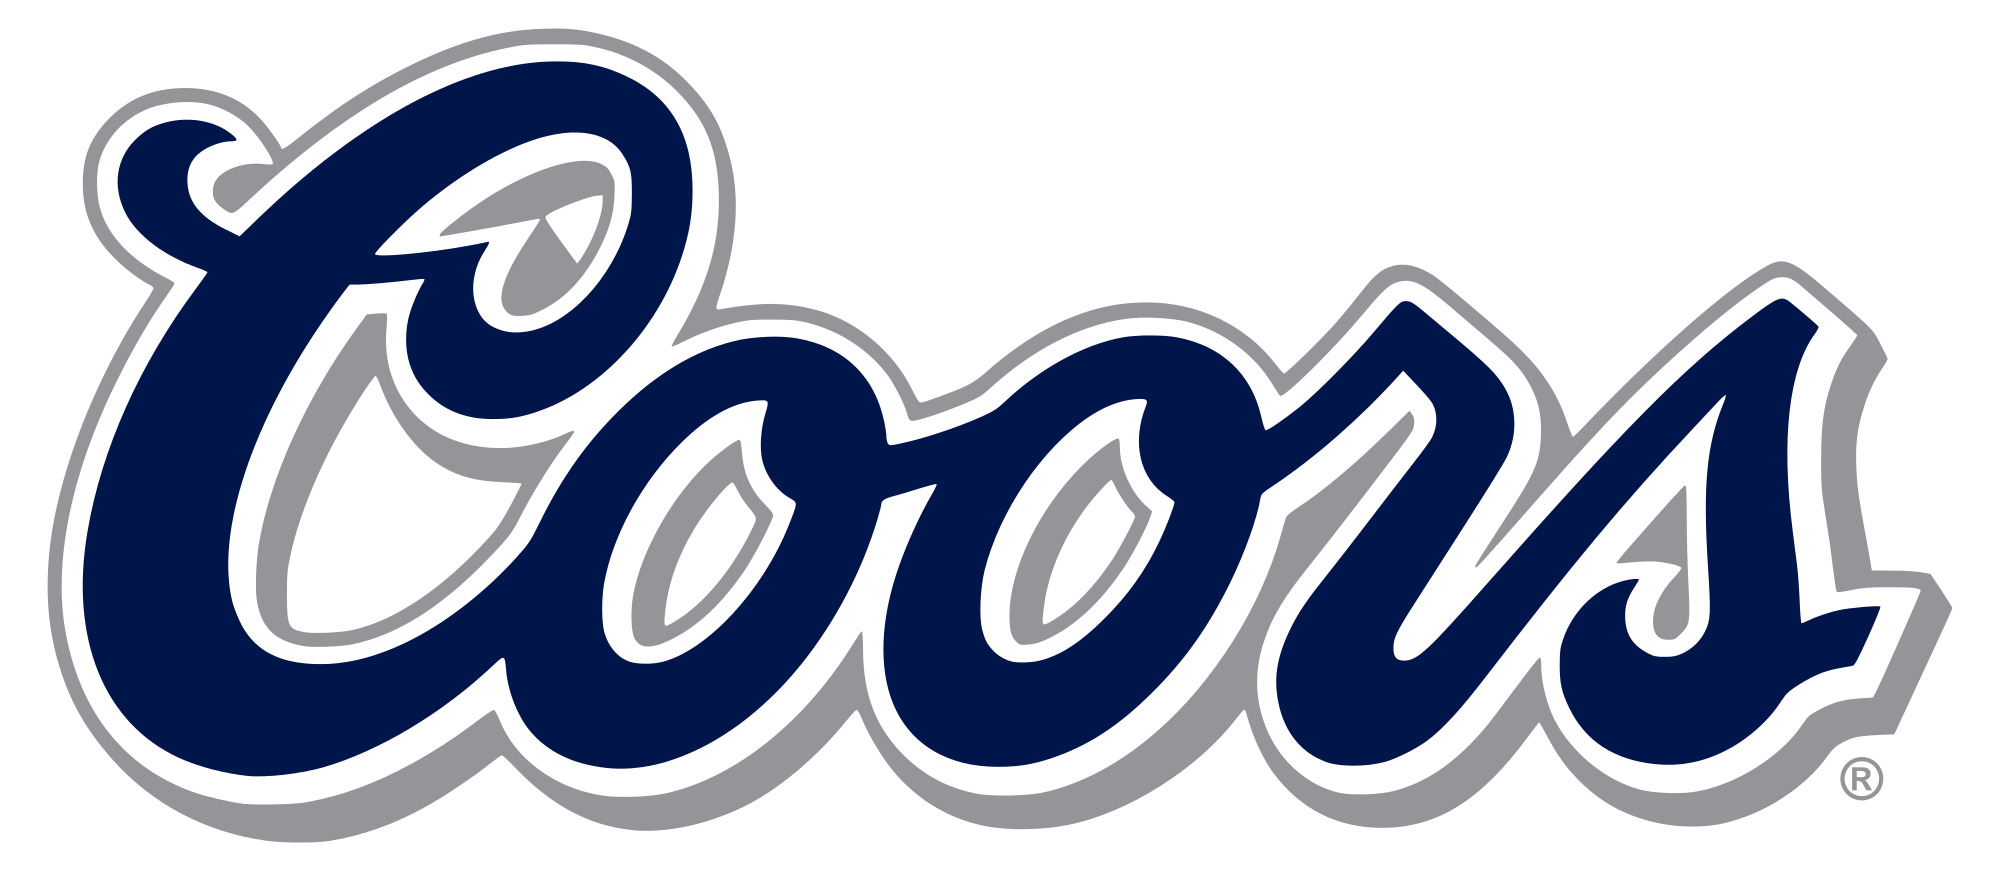 Coors Logo icons